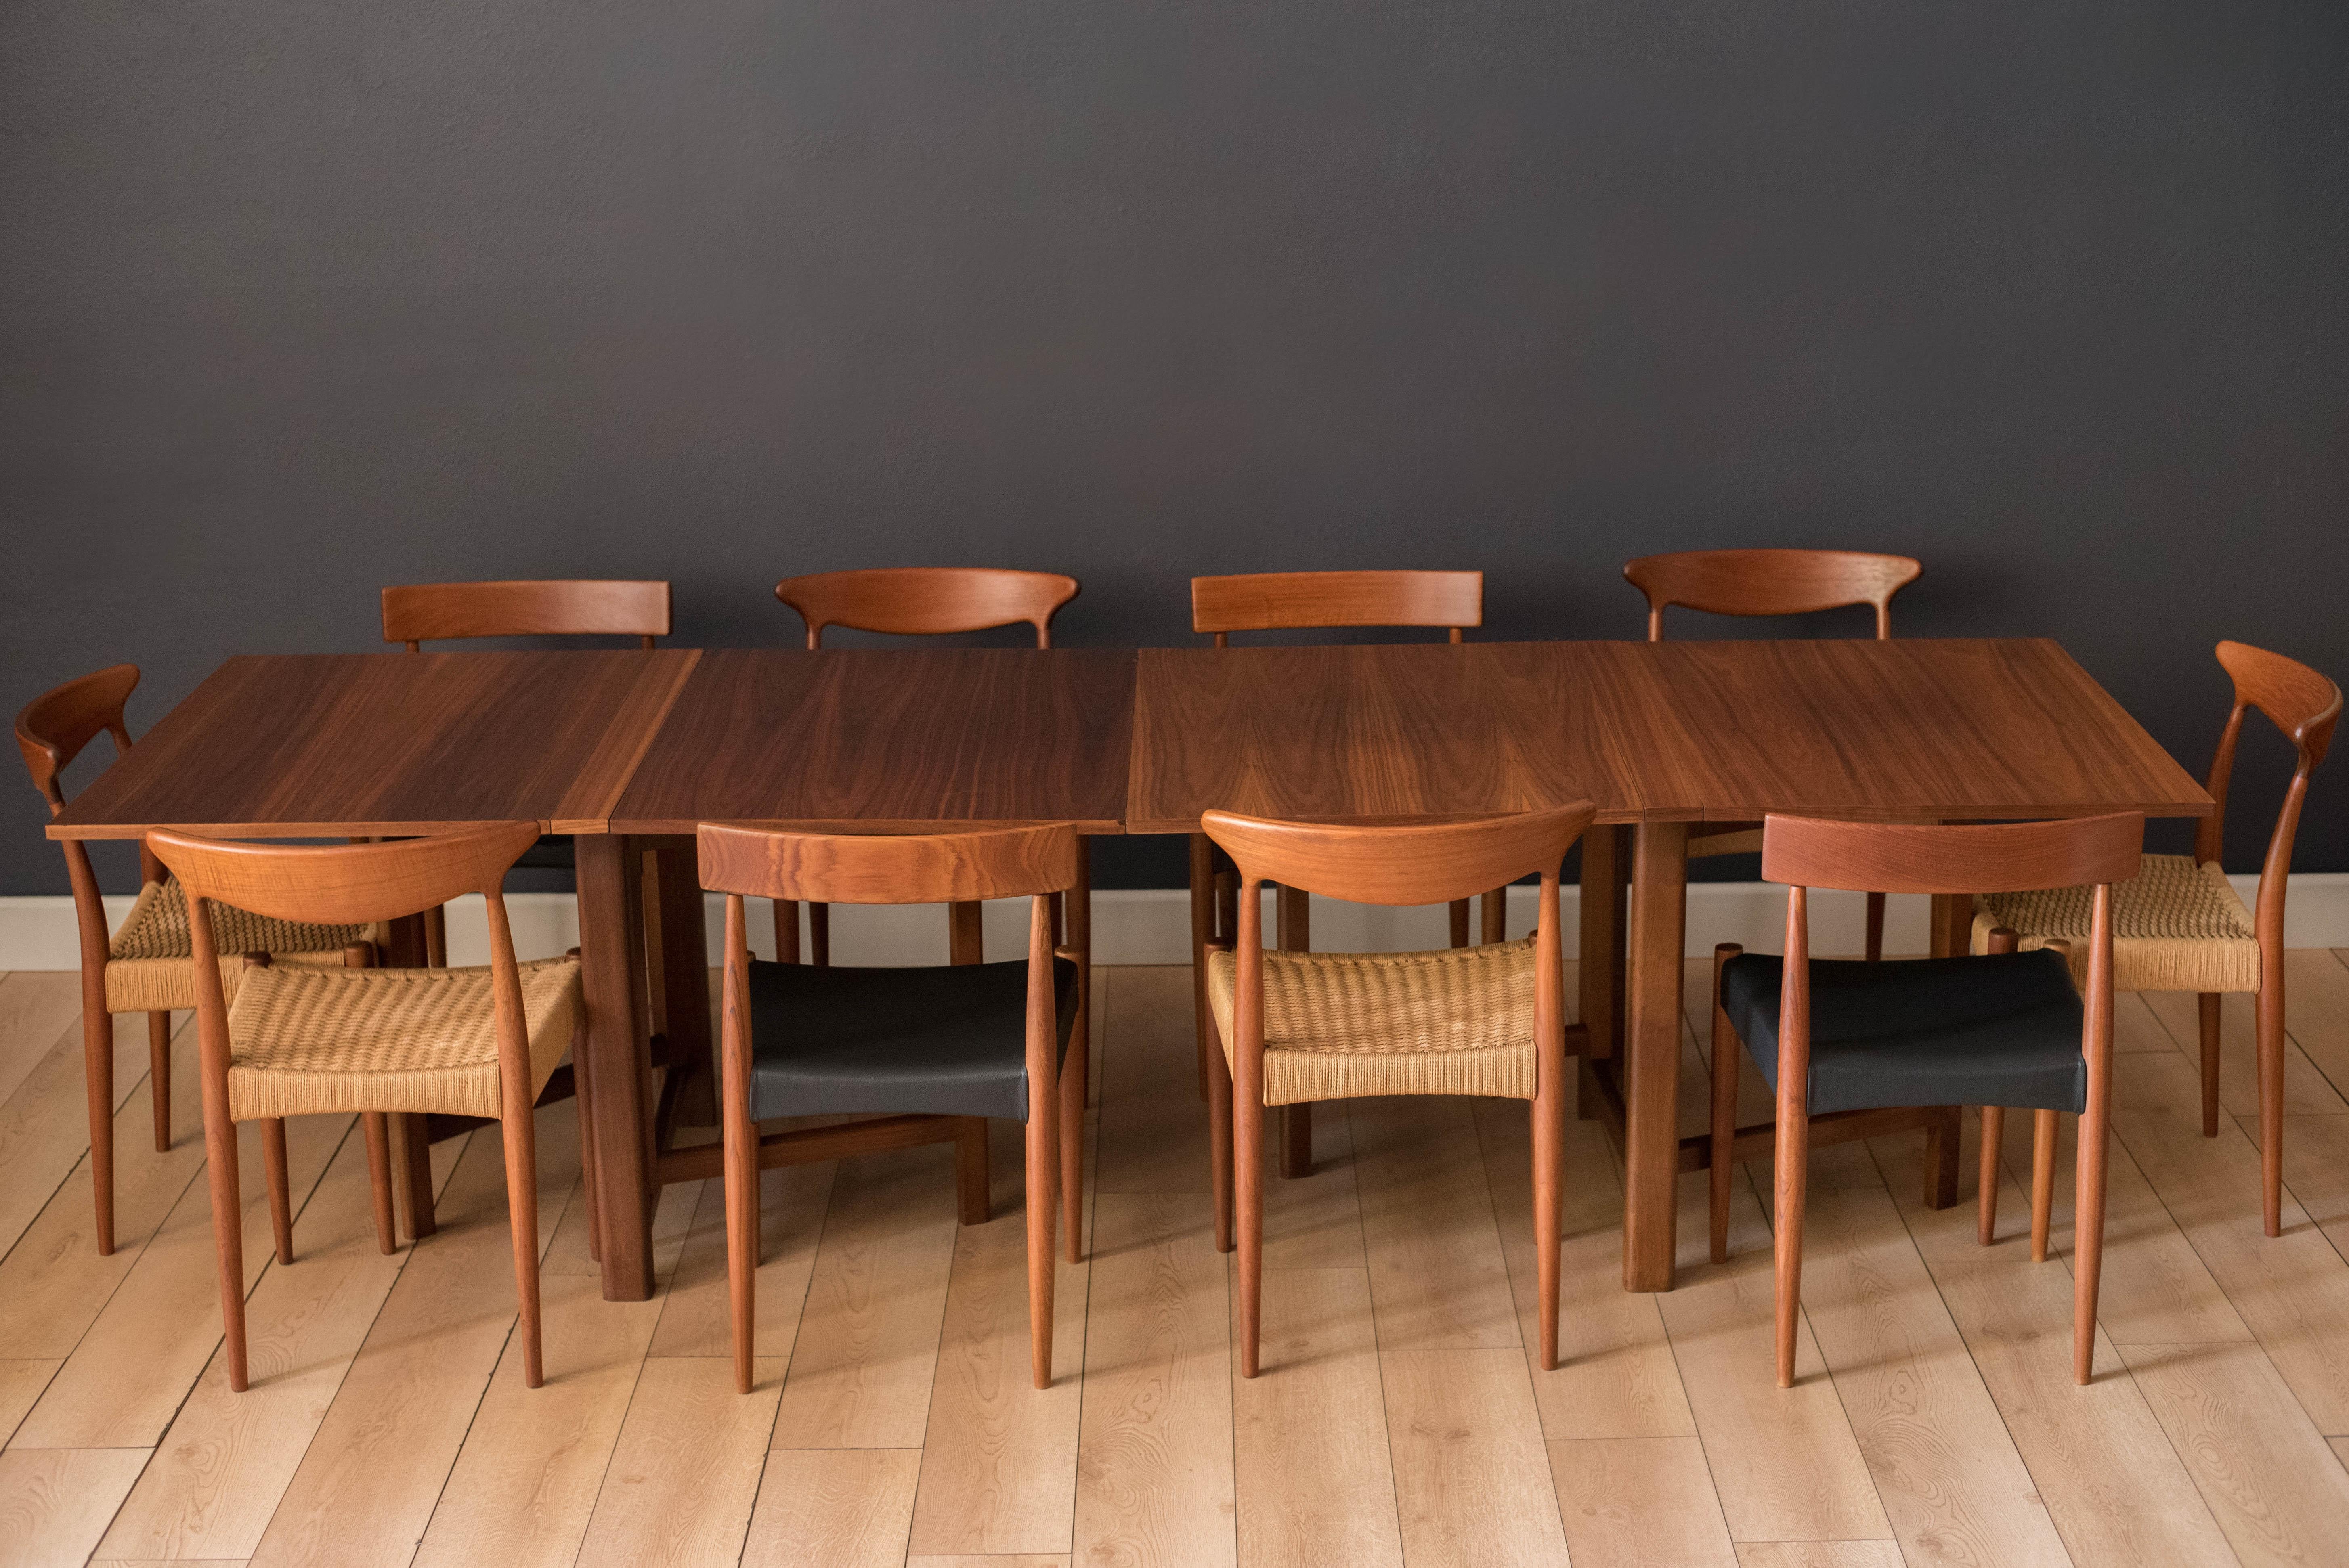 Vintage expandable rectangular shaped dining table in walnut, circa 1960s. This clever design includes a drop leaf extension feature with a foldable gate leg base making this a versatile piece for many occasions. Seats up to 2-10 guests. 

Table